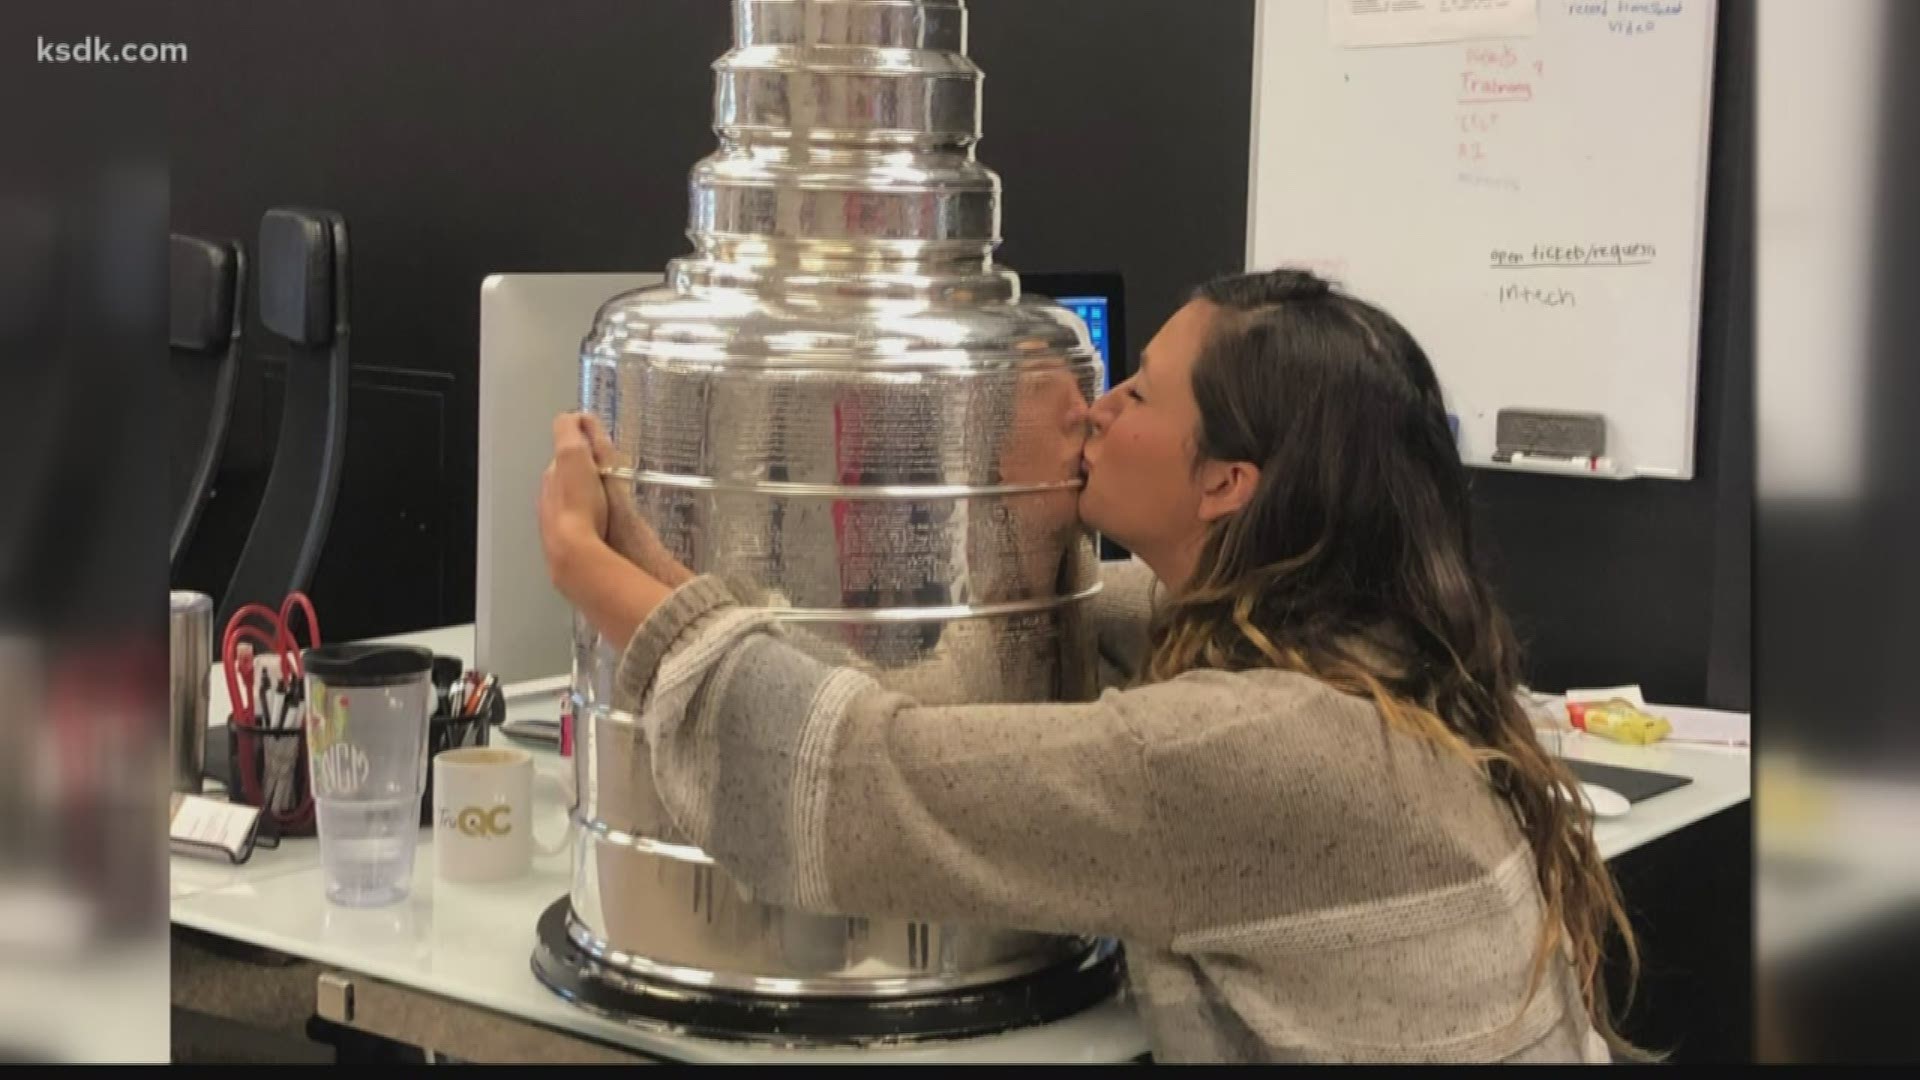 The account helped so many fans see the Cup, even though she never got the chance to see it herself. Until now.